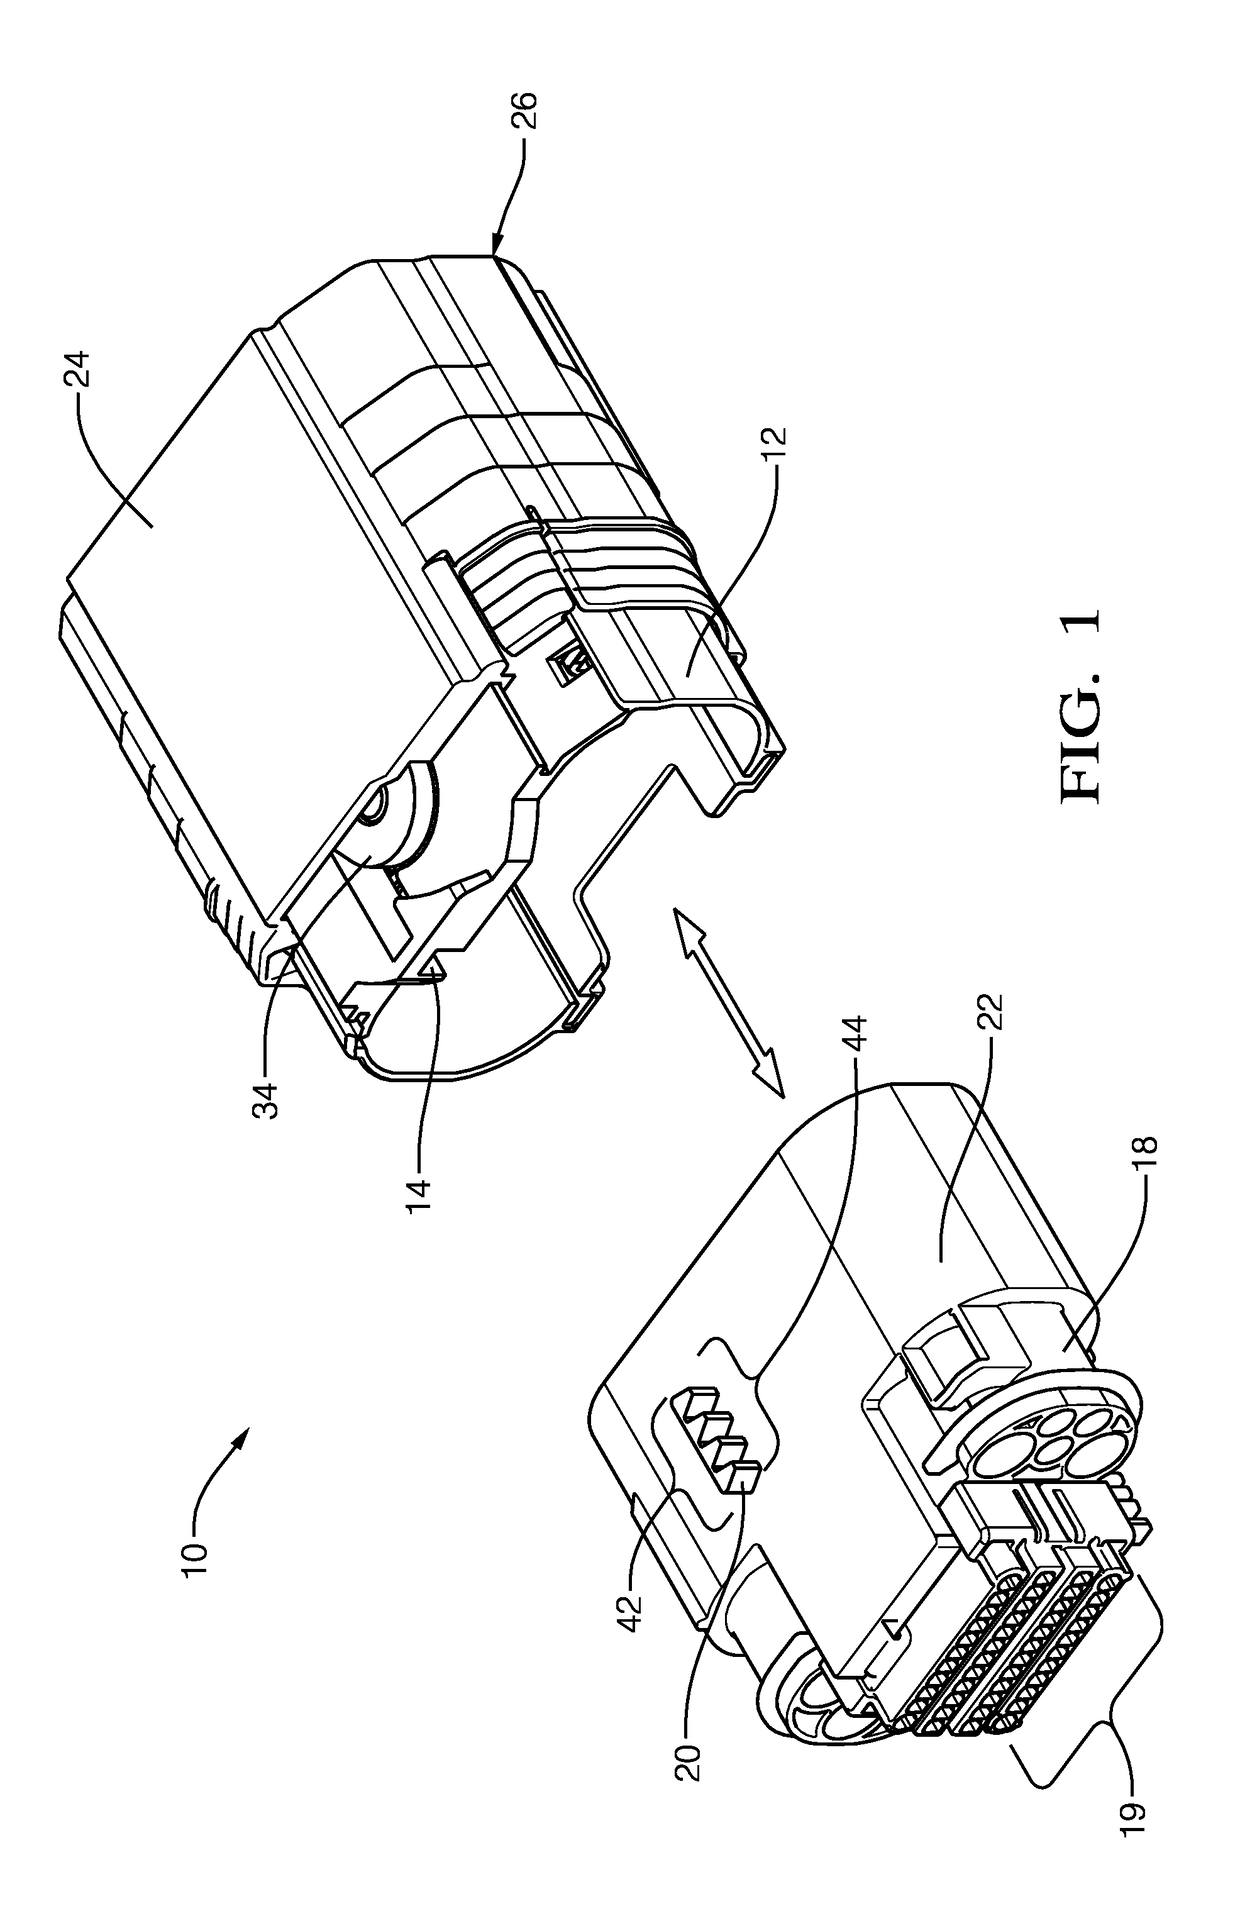 Connector assembly with variable axial assist